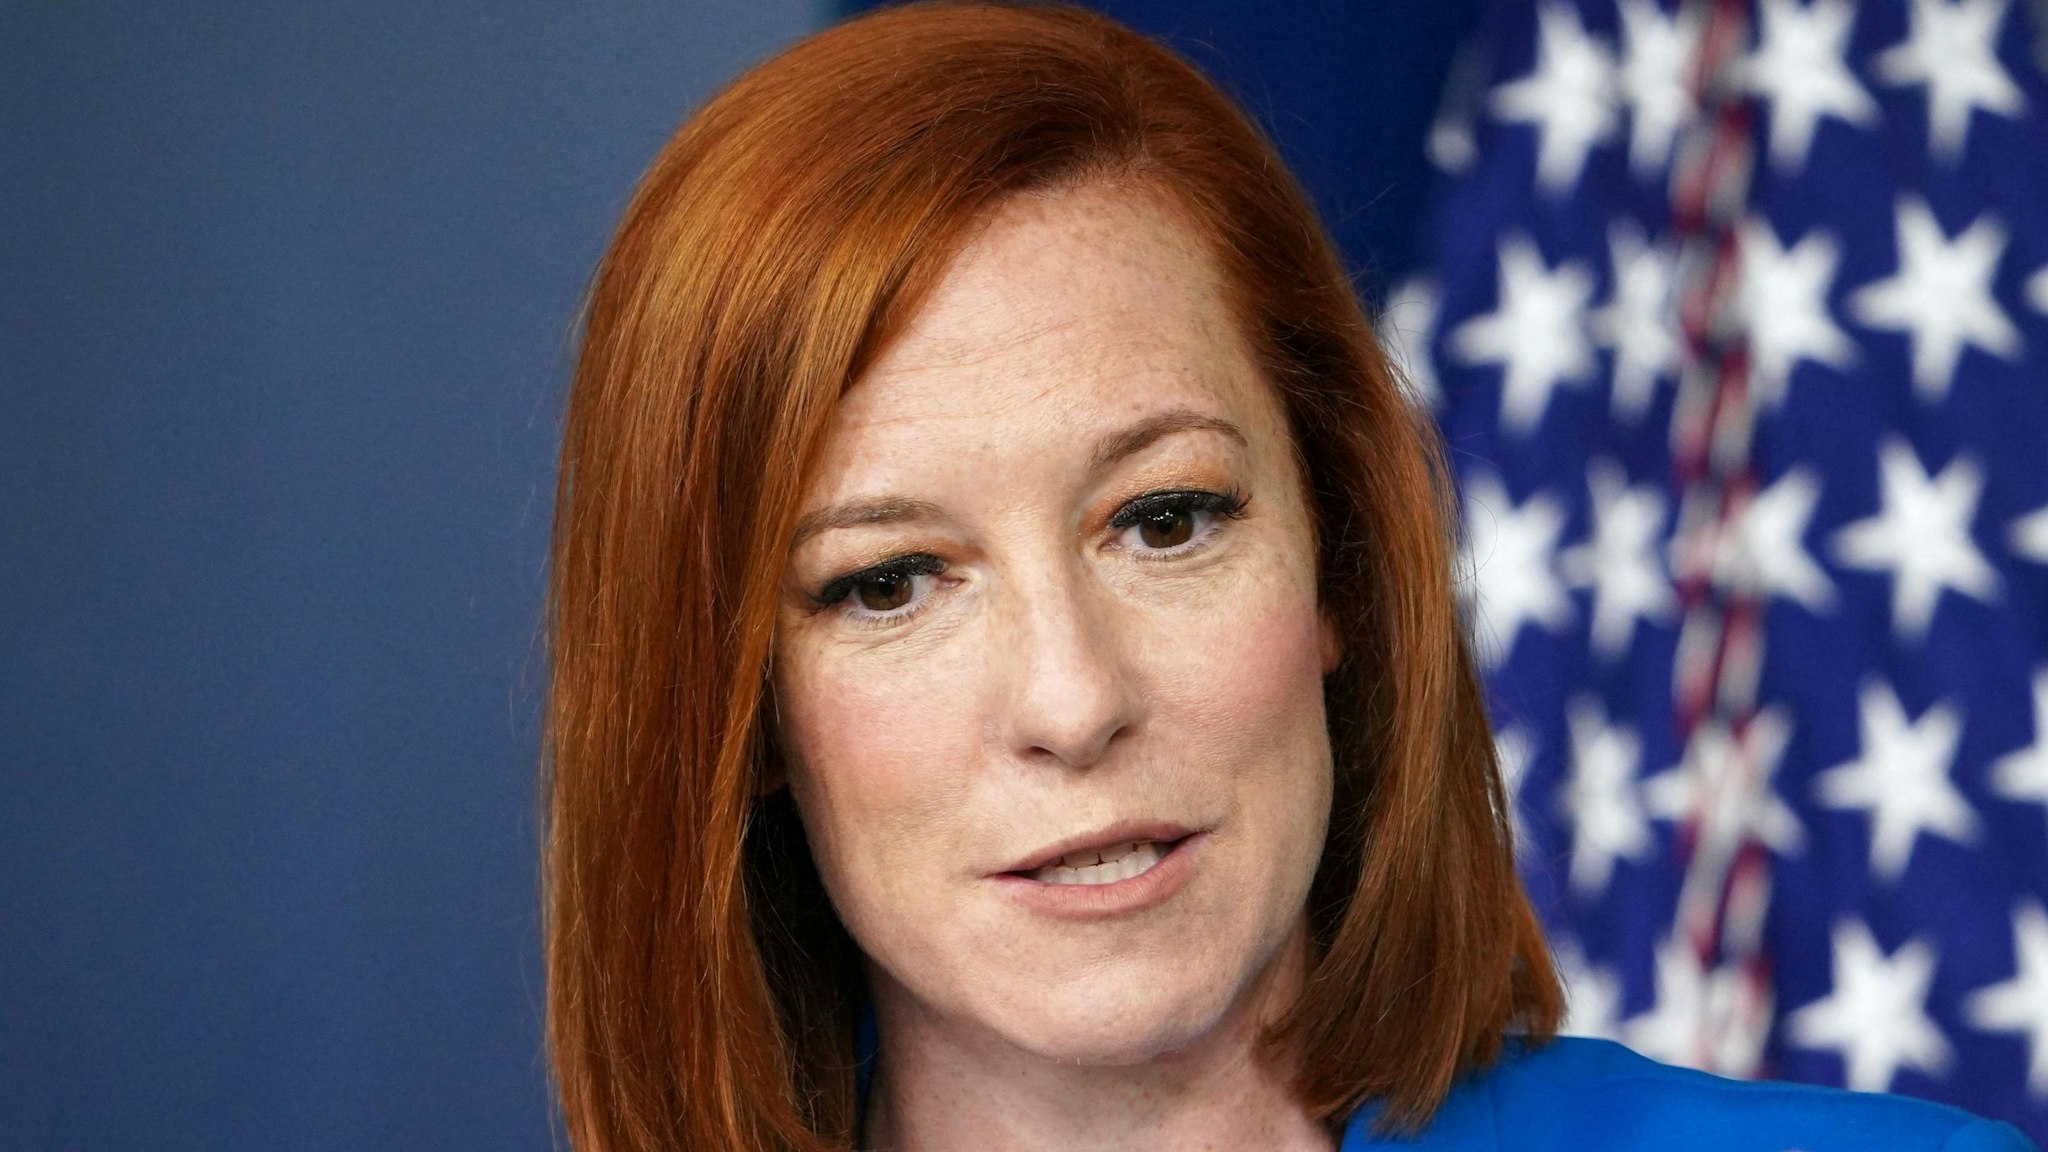 White House Press Secretary Jen Psaki speaks during the daily briefing in the Brady Briefing Room of the White House in Washington, DC on June 7, 2021.